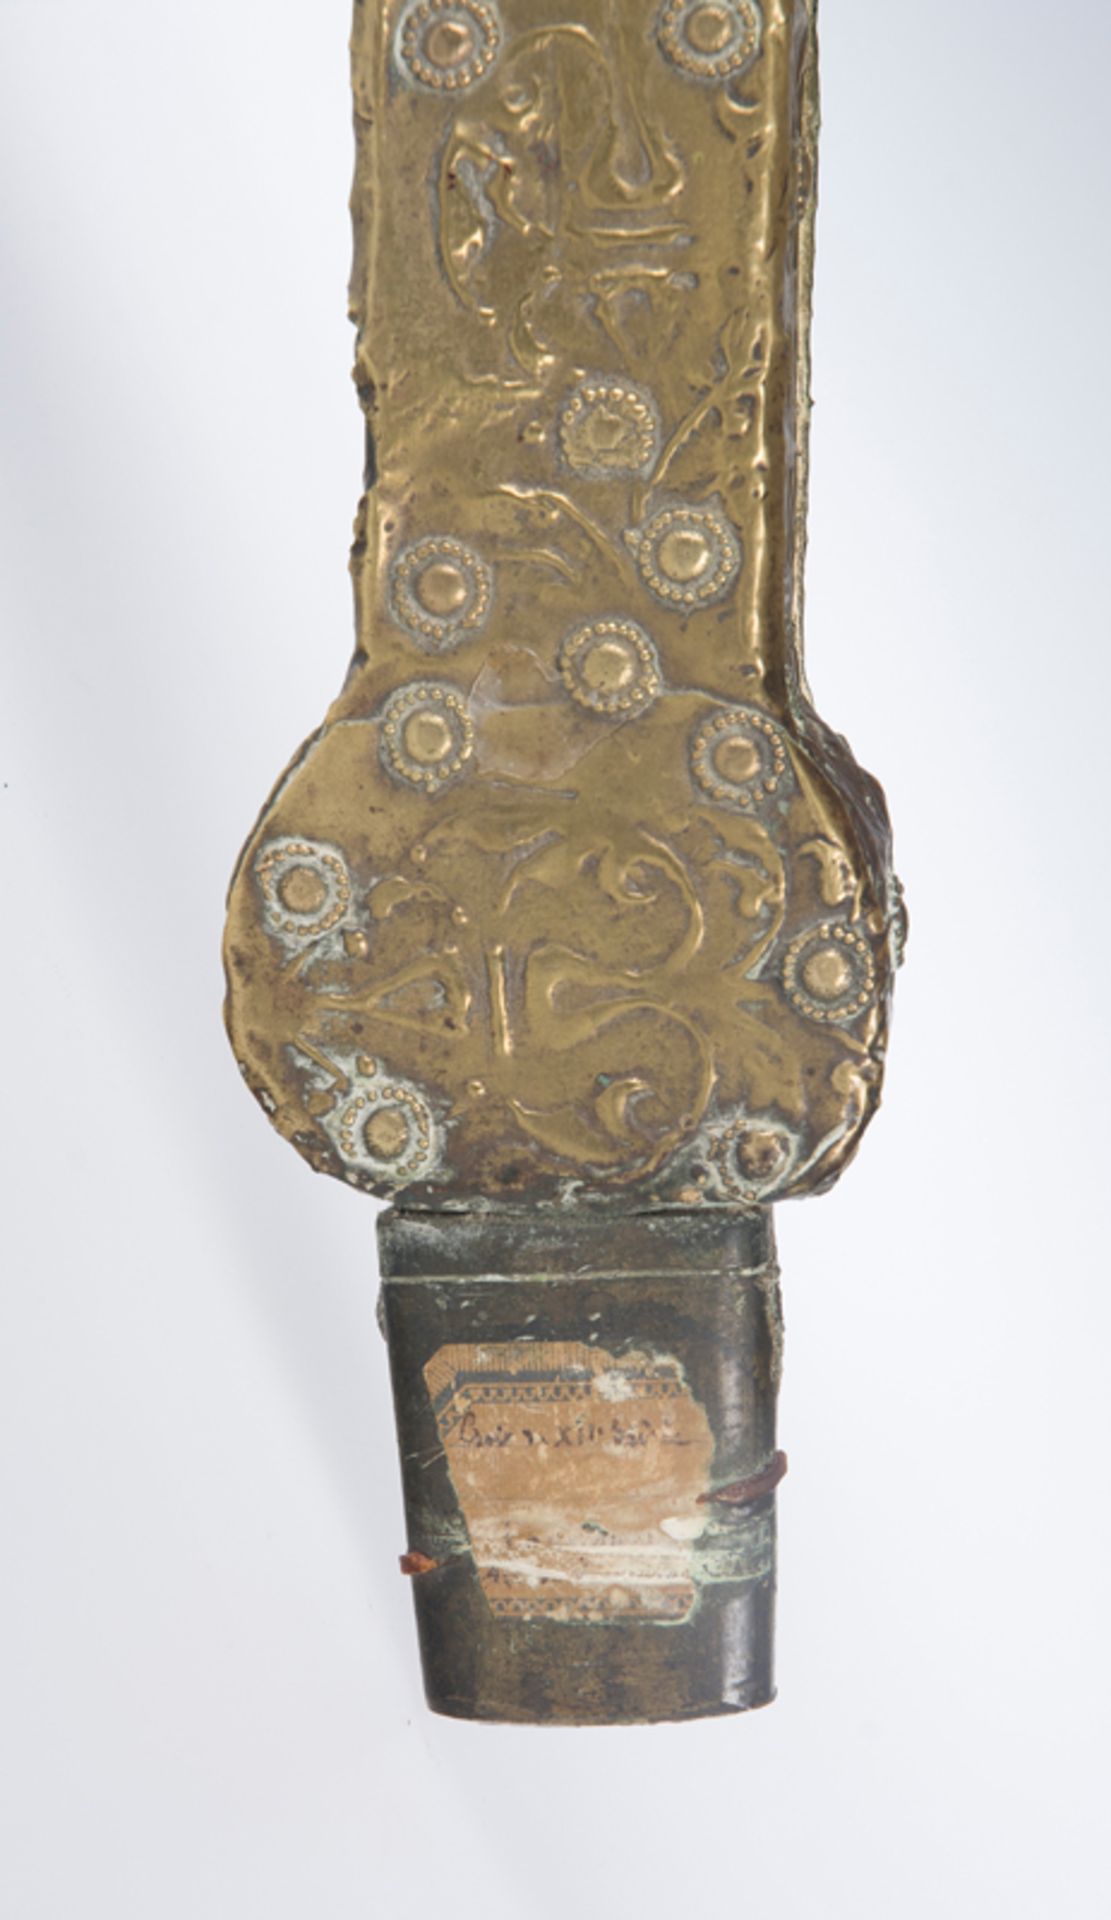 Embossed and hammered gilded copper processional cross, with an appliqué figure of Christ. La - Image 6 of 9